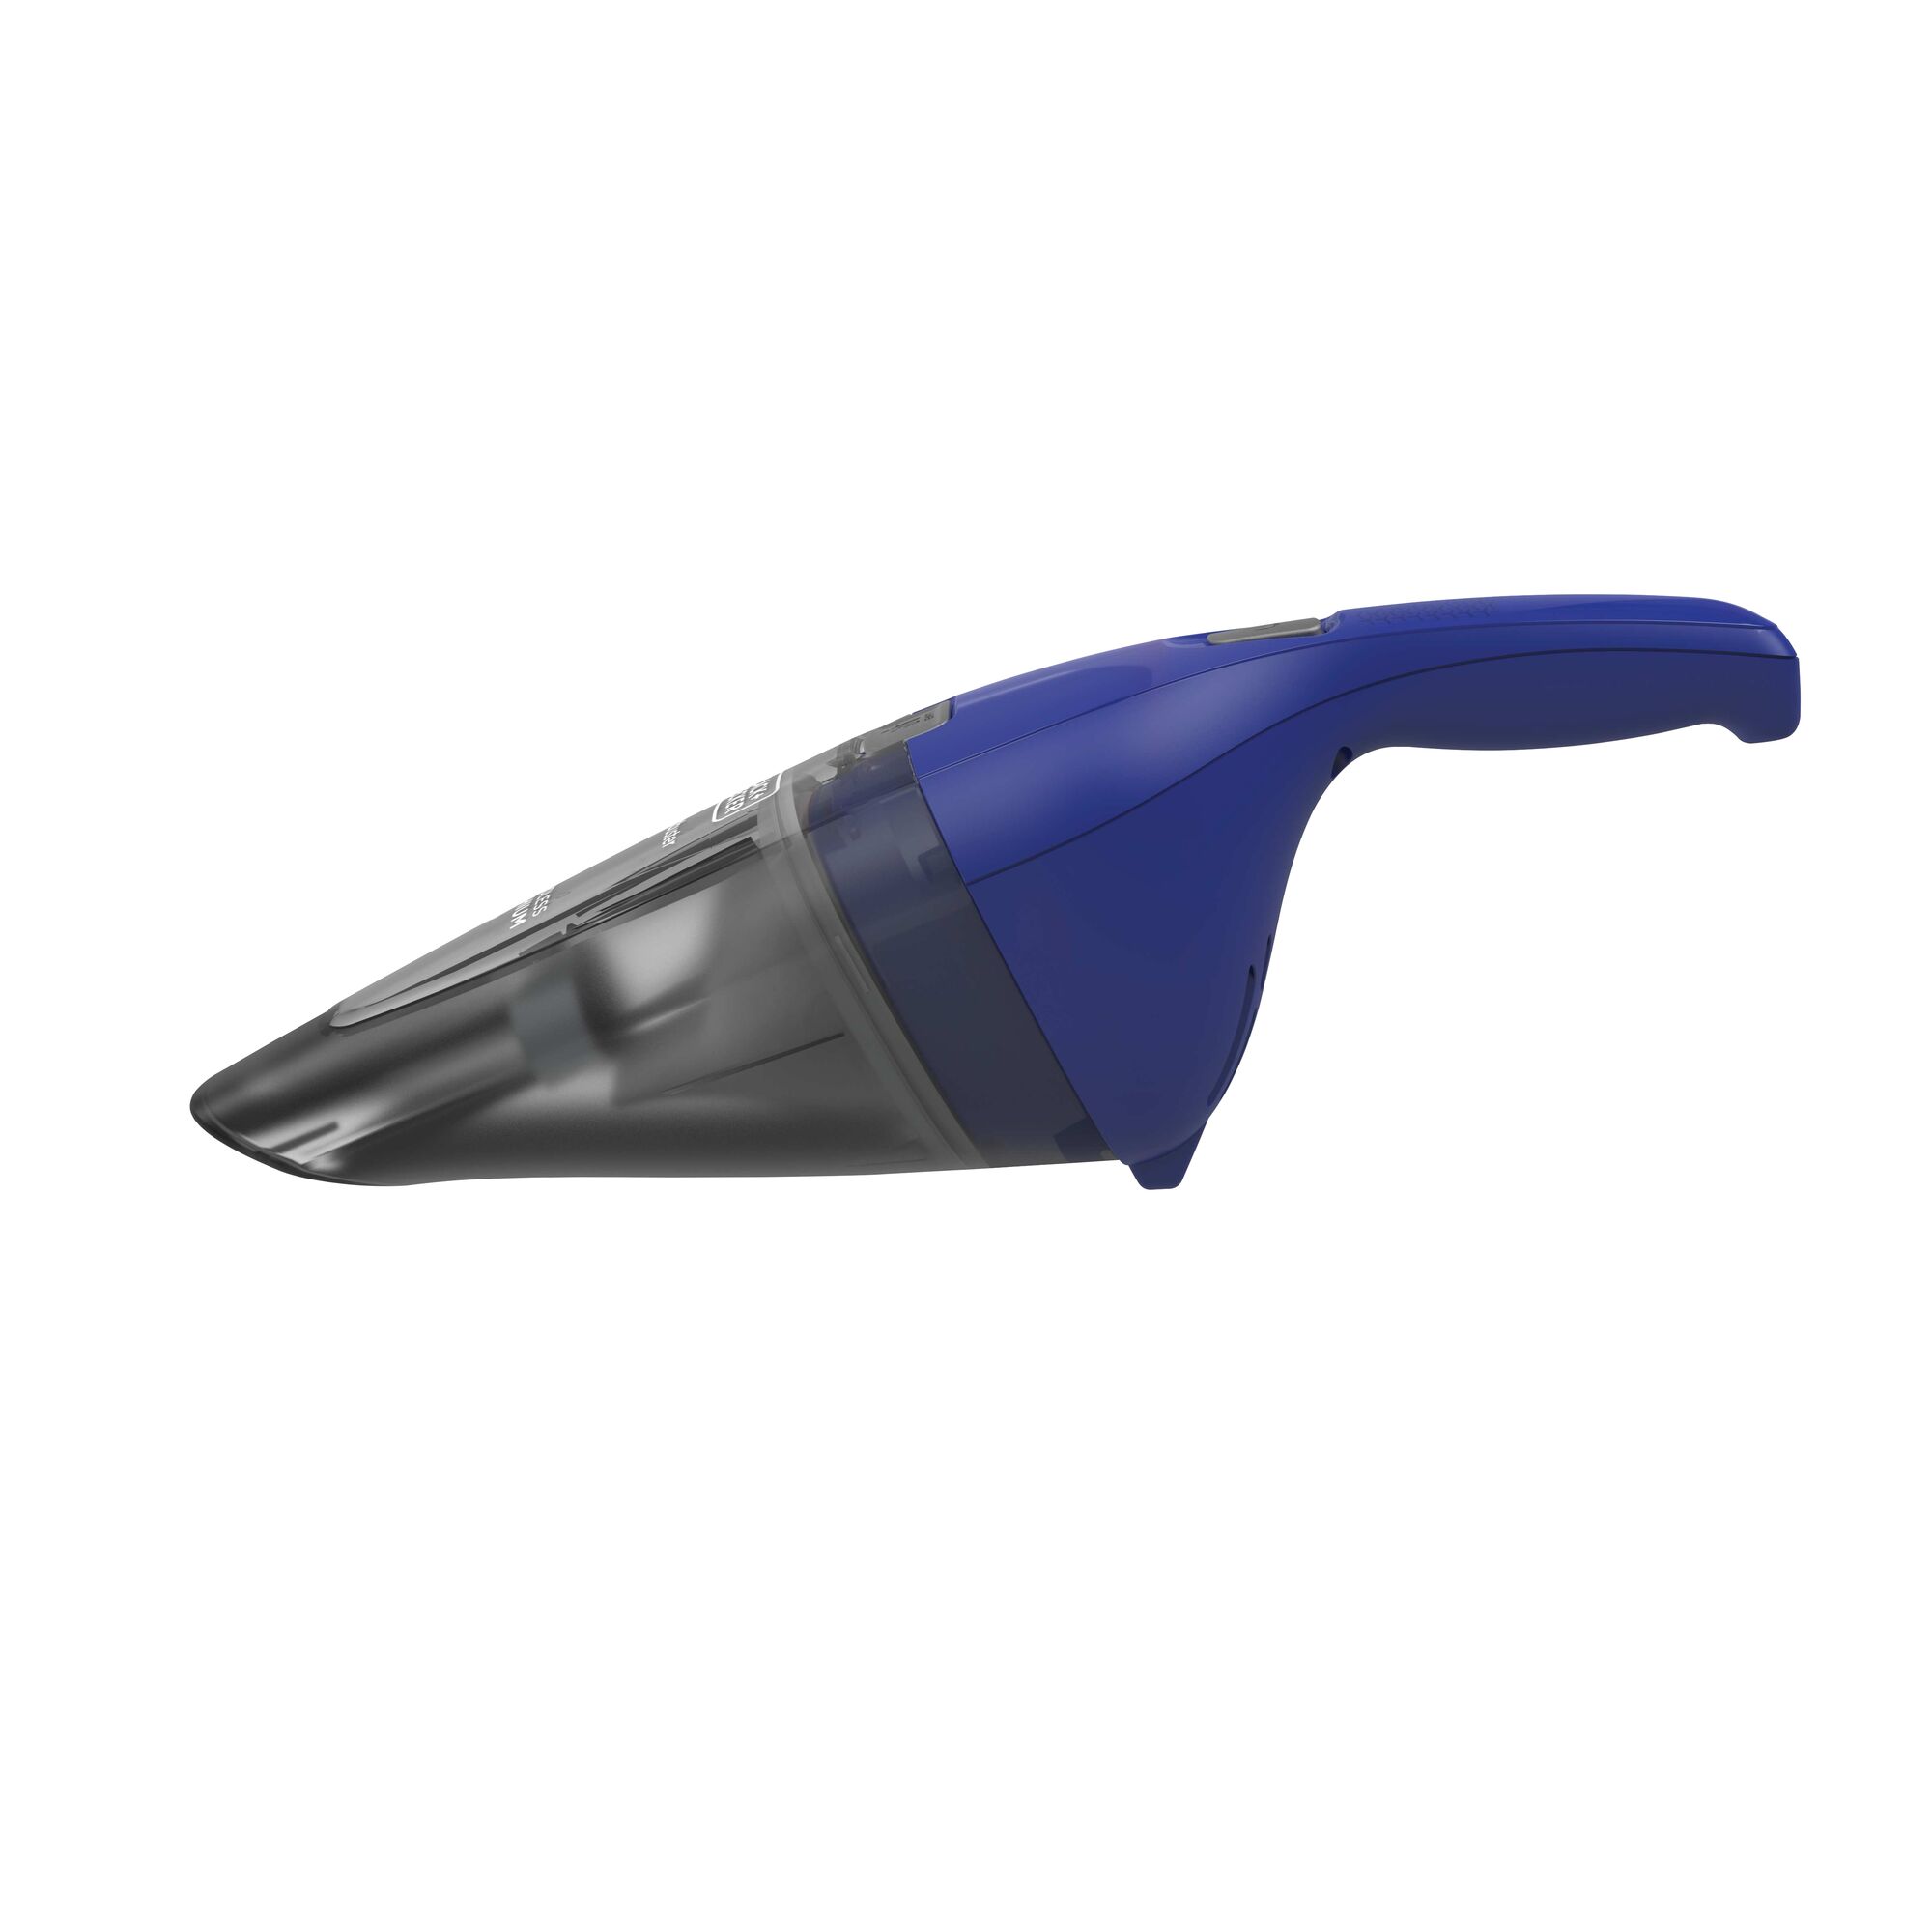 Profile of Dustbuster Quick Clean Cordless Hand Vacuum.